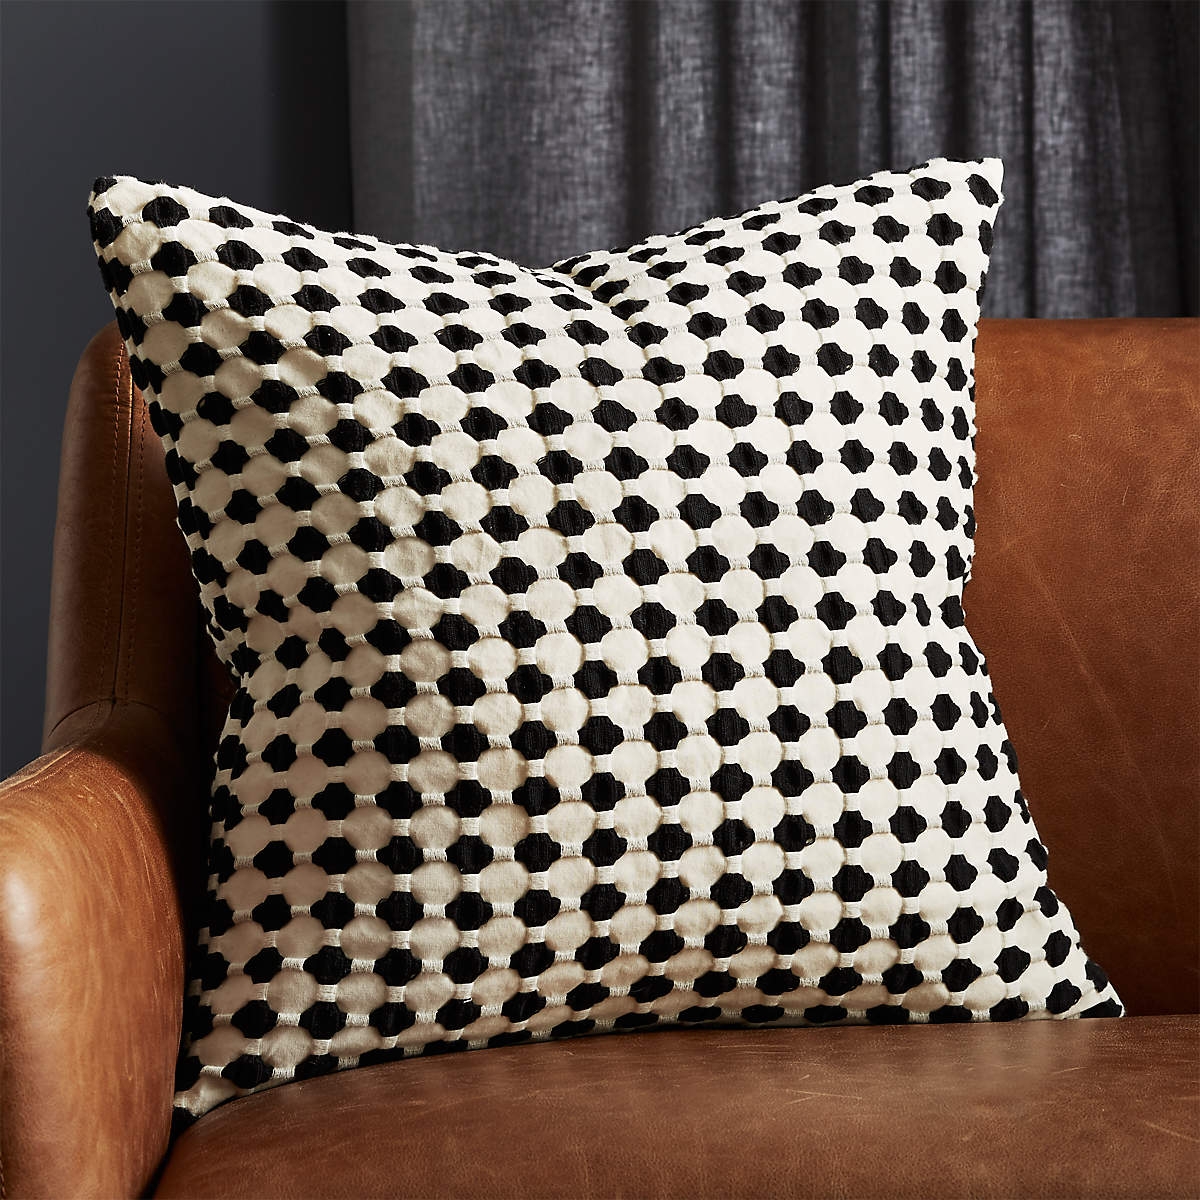 Estela Organic Cotton Black and White Throw Pillow with Feather-Down Insert 20" - Image 1